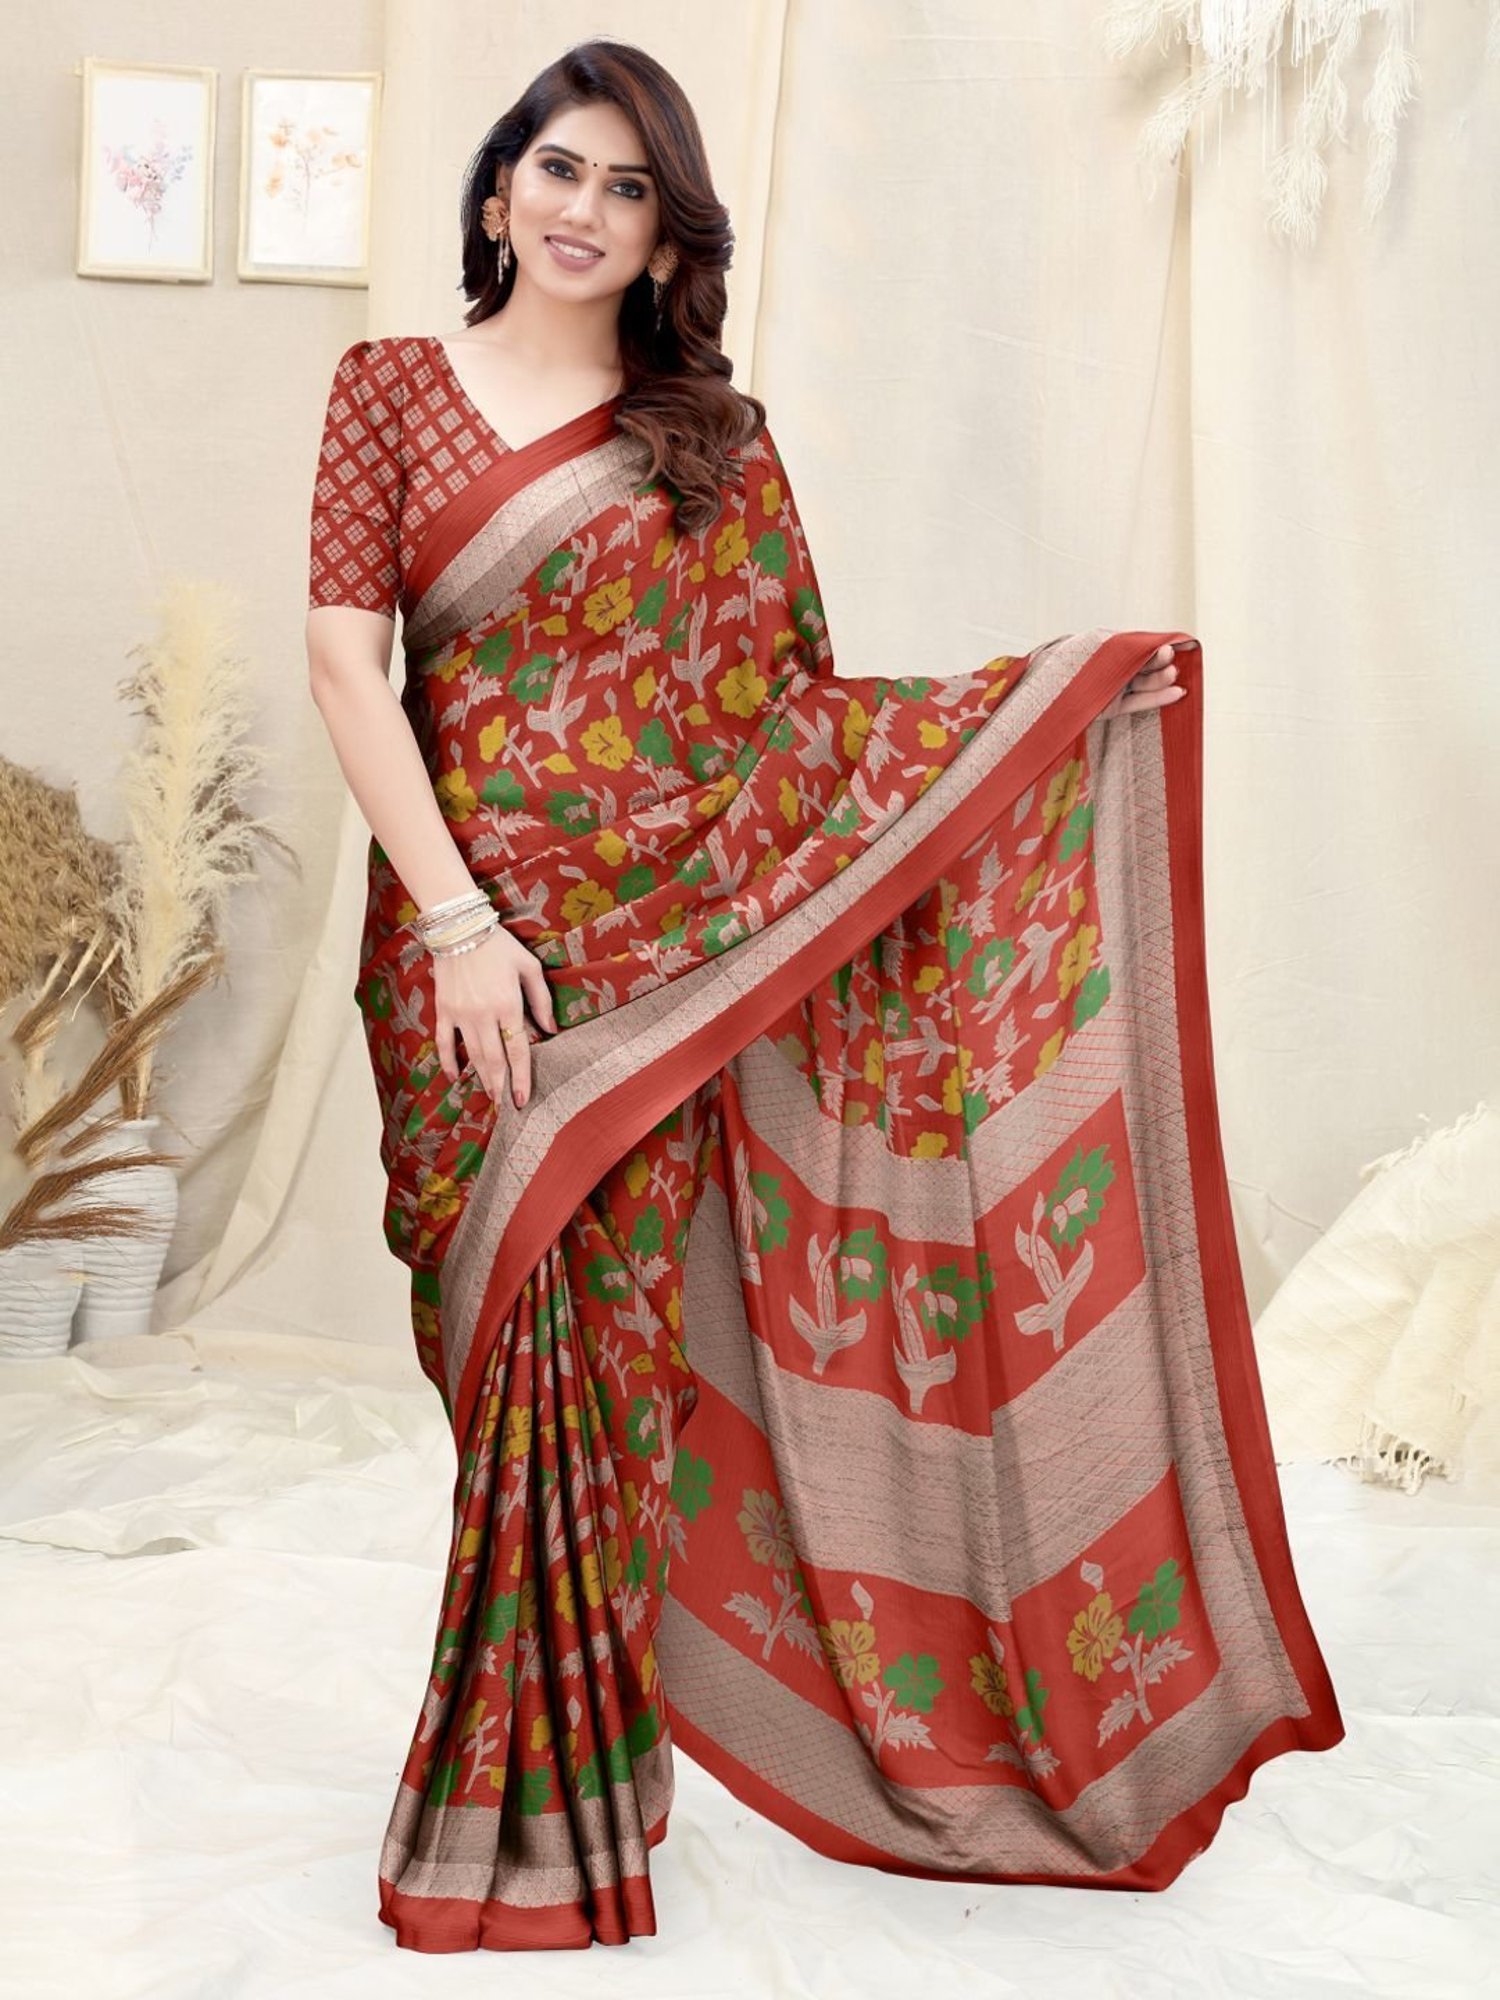 Redefine Fashion with Colourful Screen-Printed Sarees from Dora